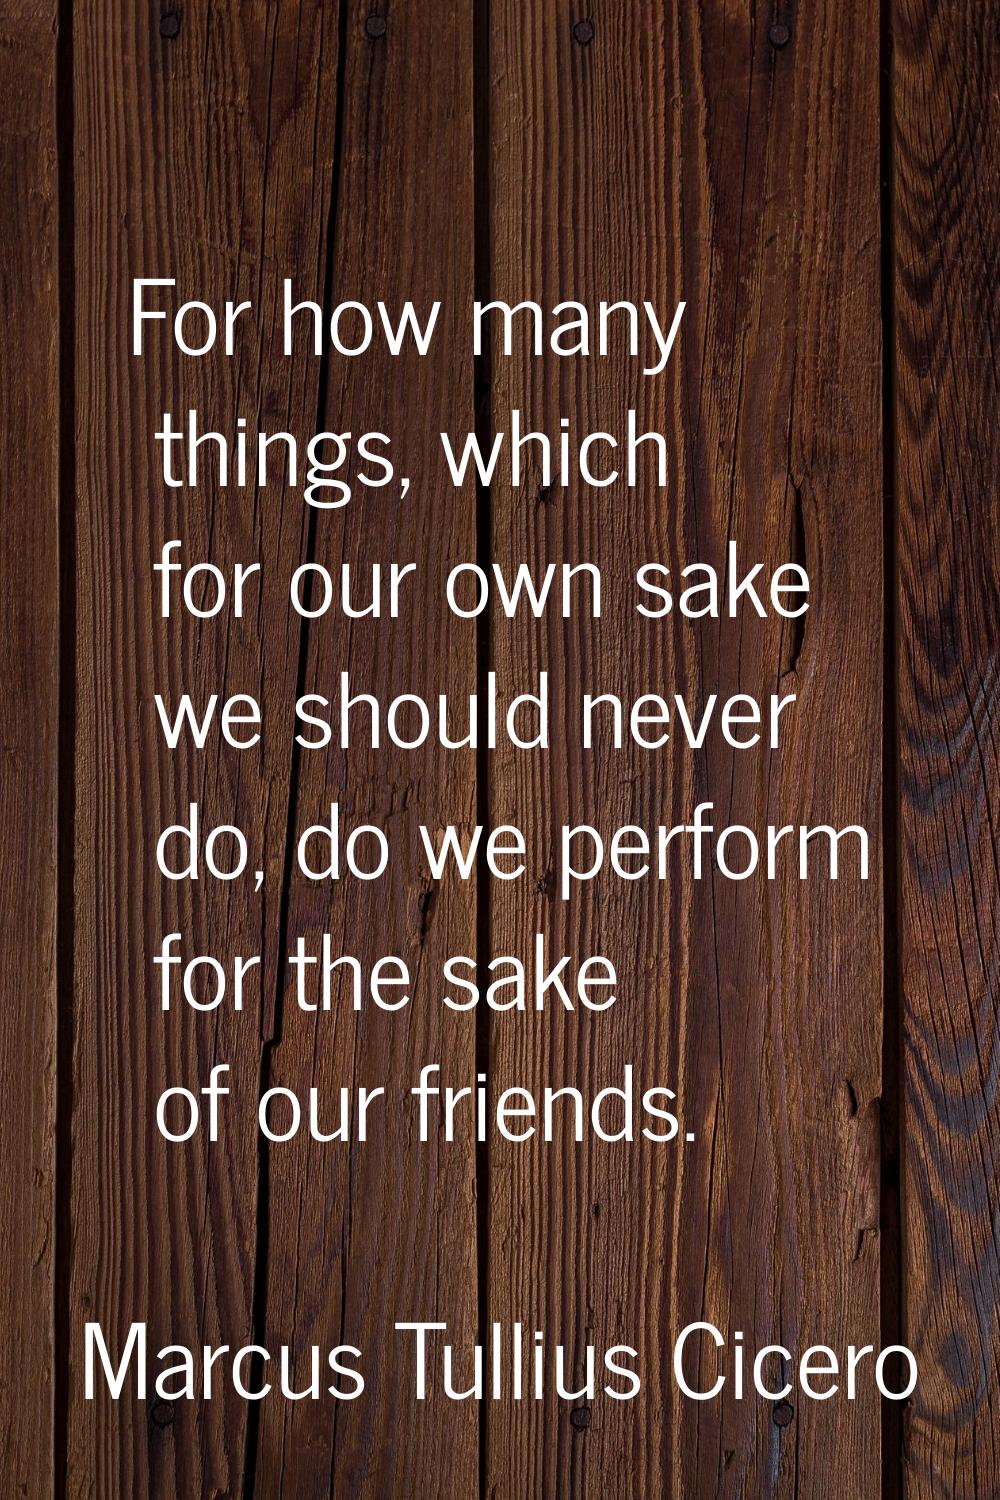 For how many things, which for our own sake we should never do, do we perform for the sake of our f